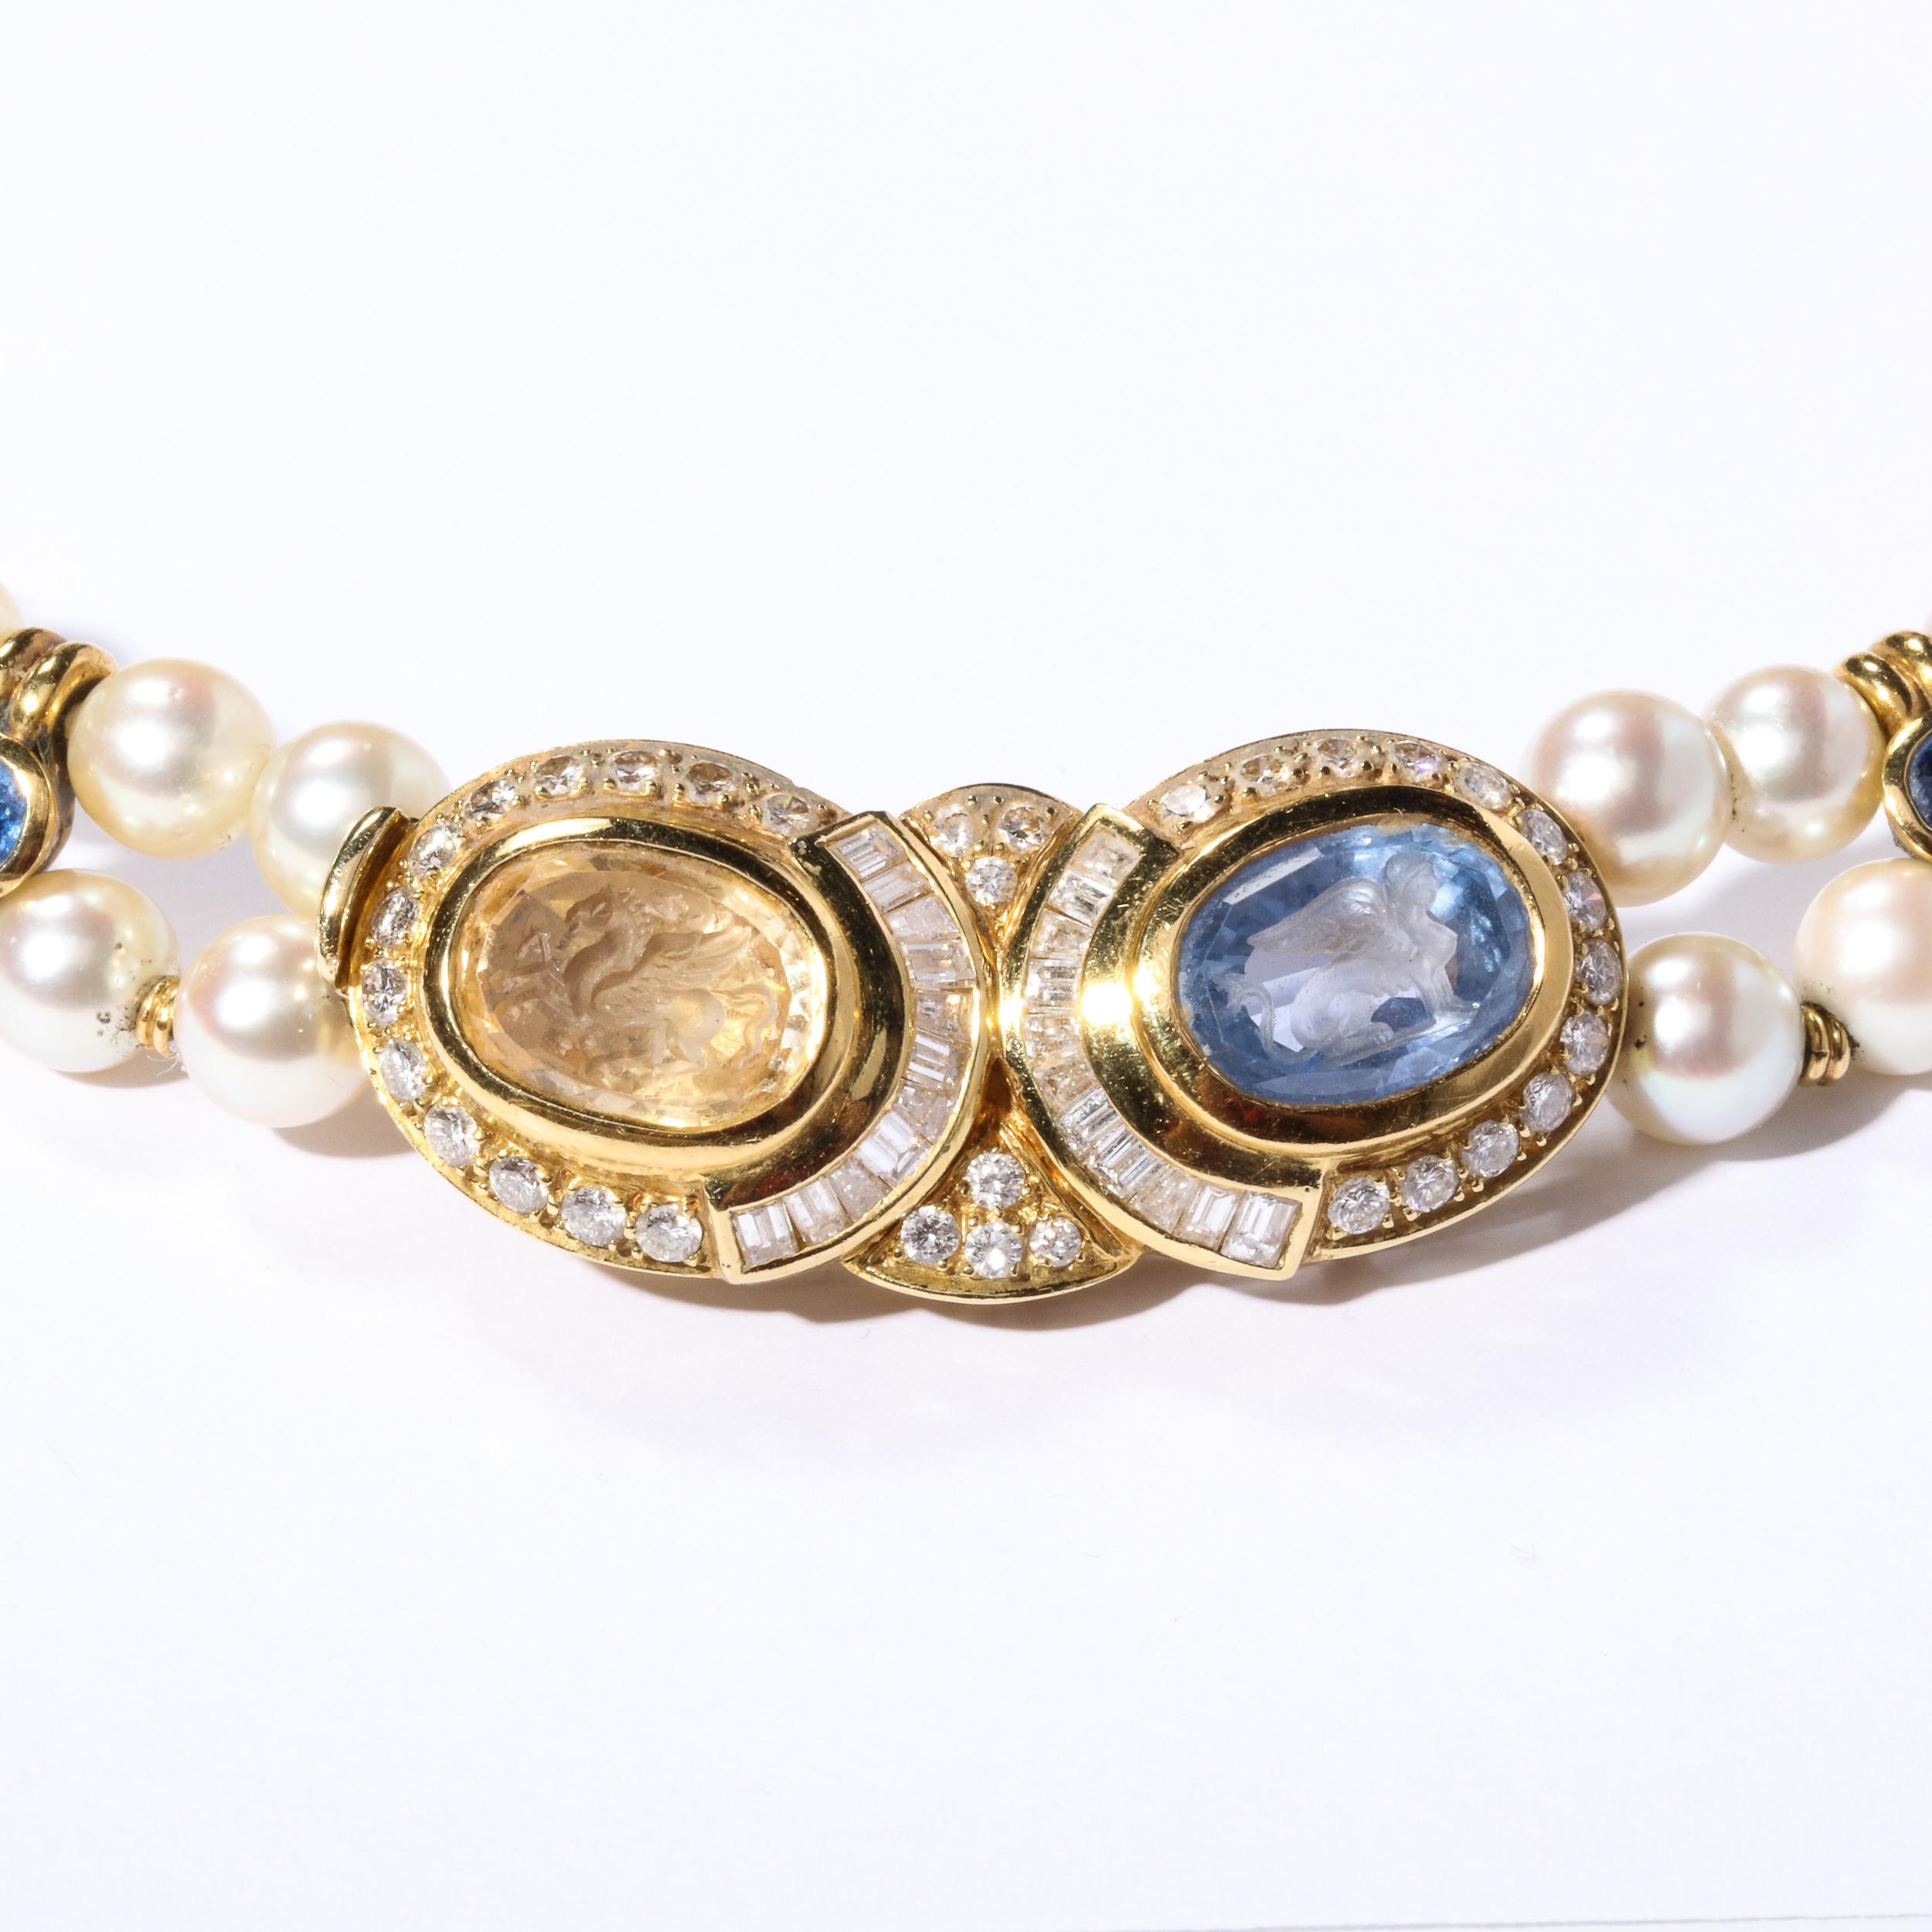 Double Strand Pearl Necklace  with Carved Citrine & Iolite, 18k and Diamonds  (Neoklassisch) im Angebot